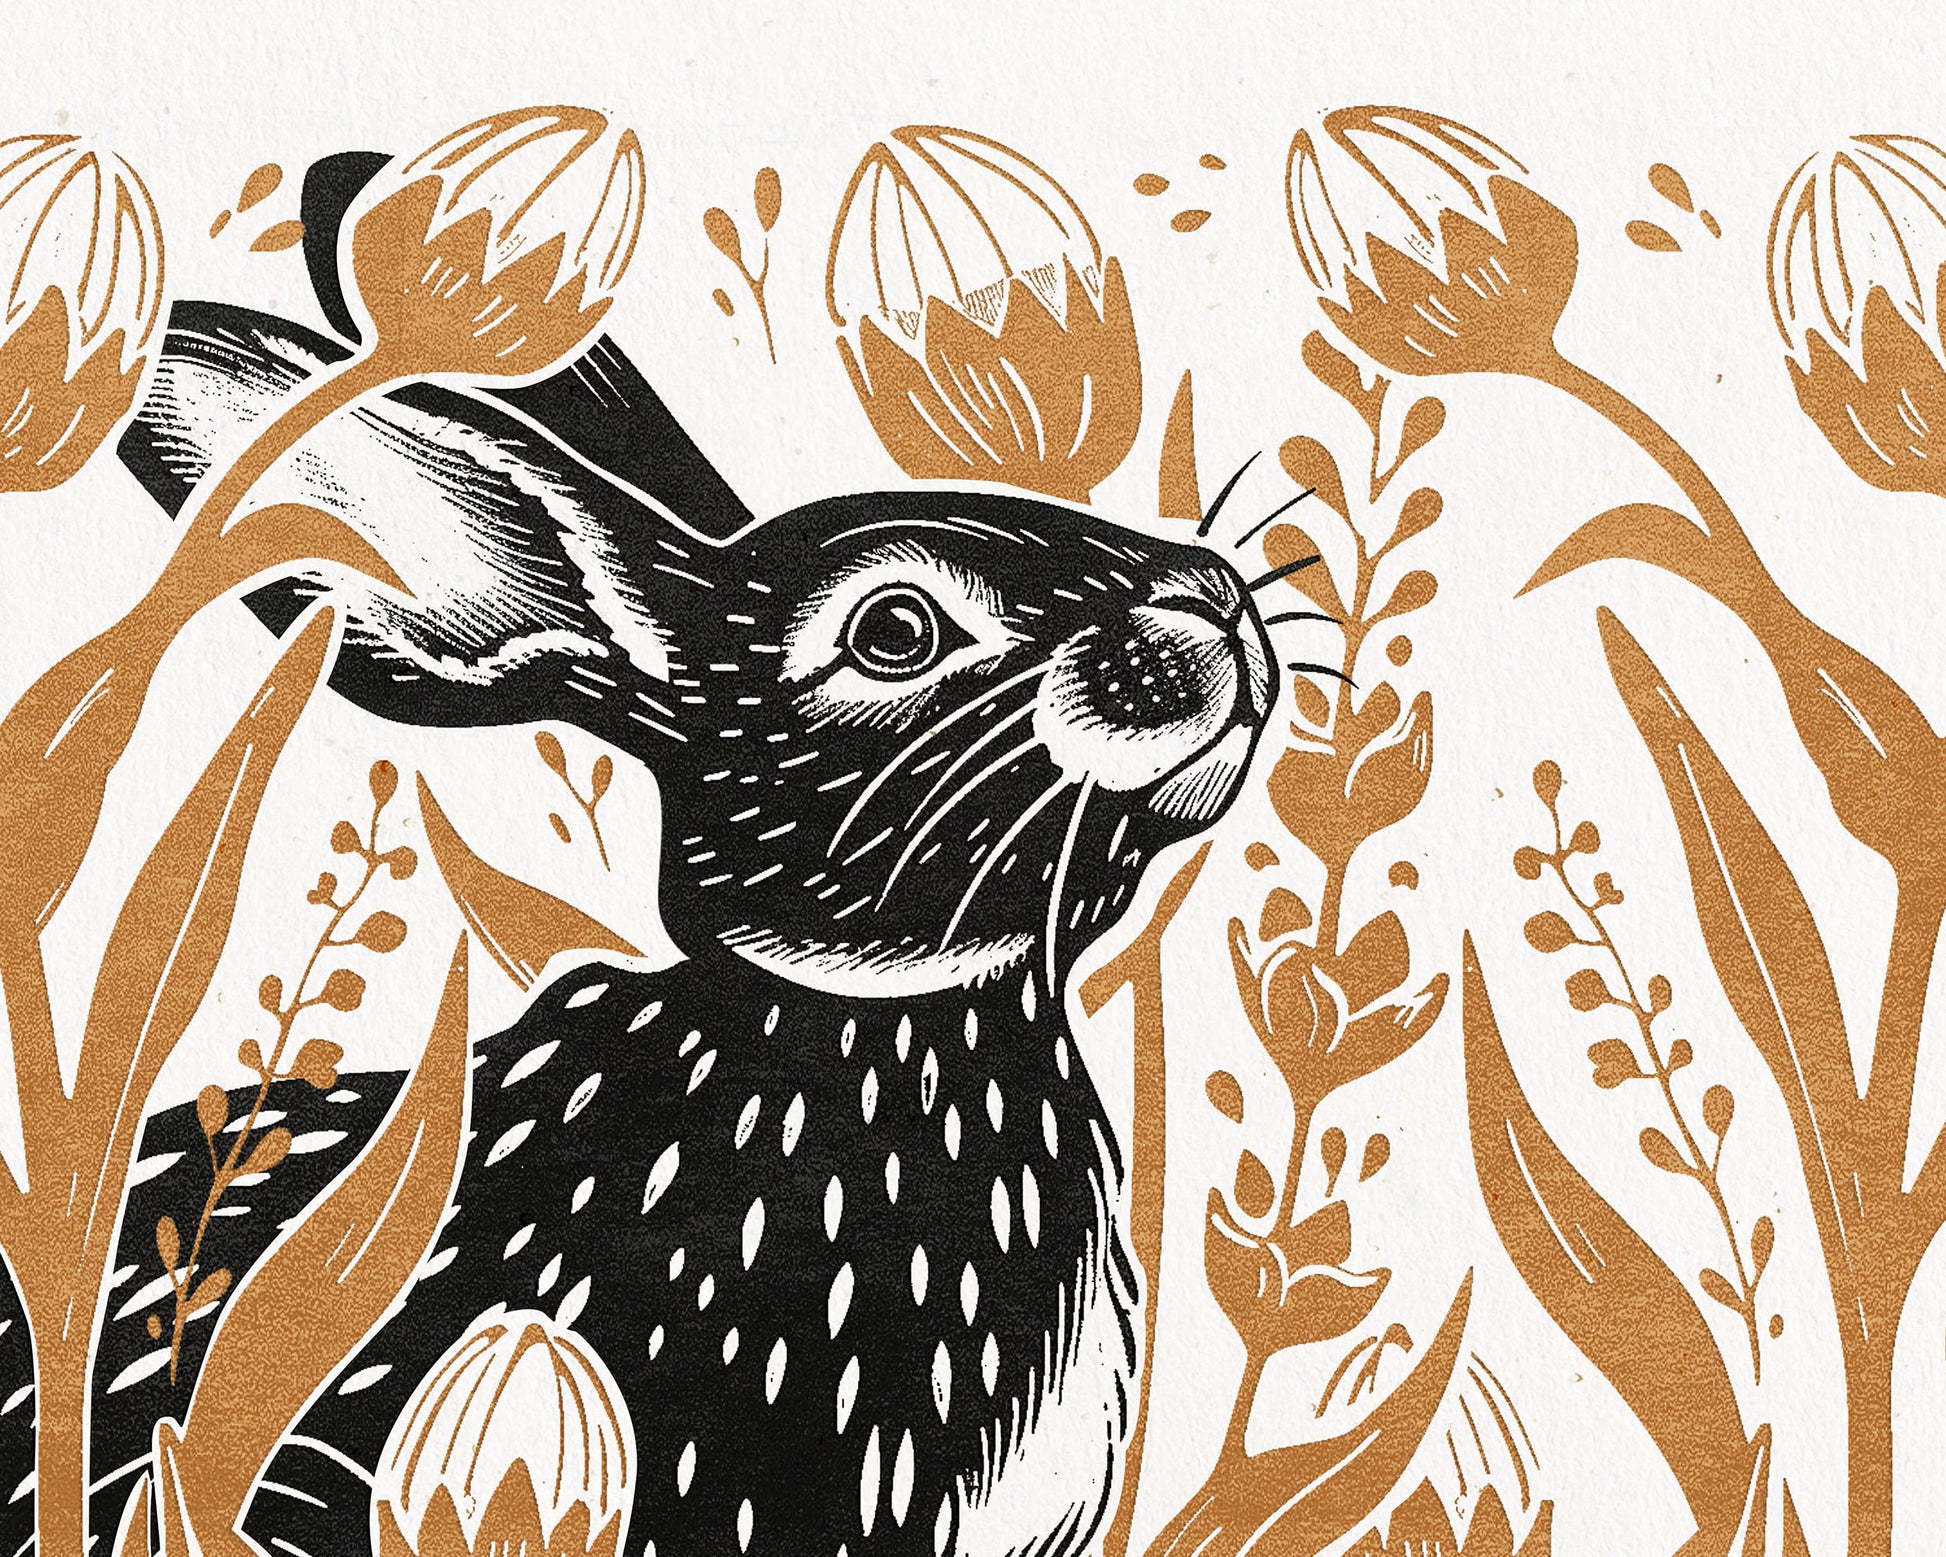 Printable linocut prints Bunny with wildflower and plant wall art Ochre black Relief texture Cottagecore decor Digital downloadable poster Hare rabbit Instant download Tulips floral flower Easter Bedroom Living room Kids Children Kitchen decor Foraged New home firs gift Housewarming wall art 